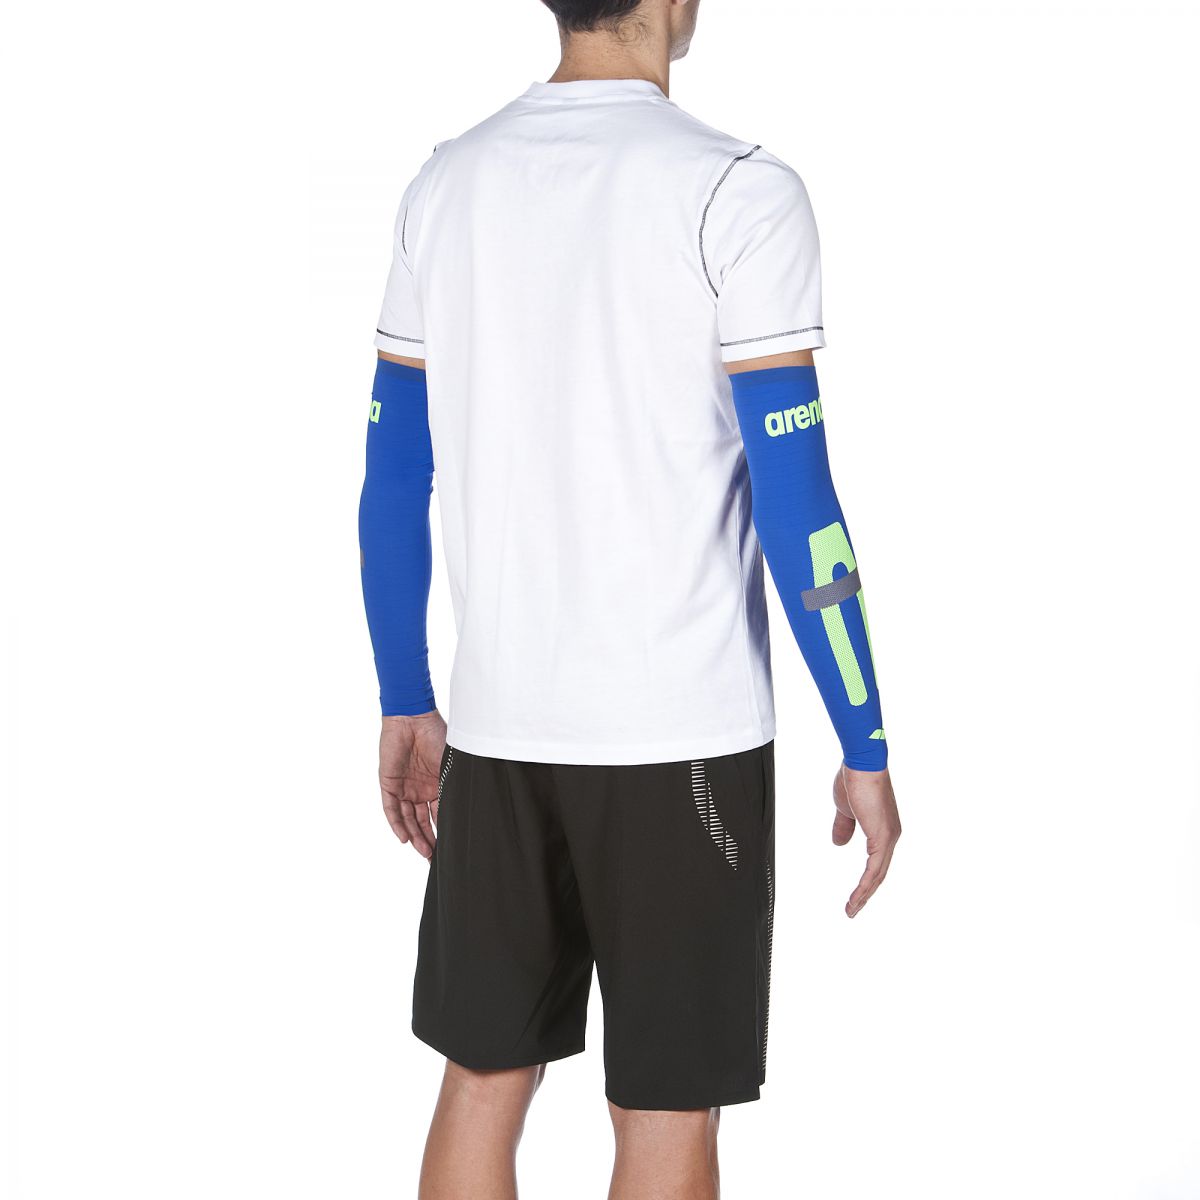 Carbon Compression Arm Sleeves electric-blue